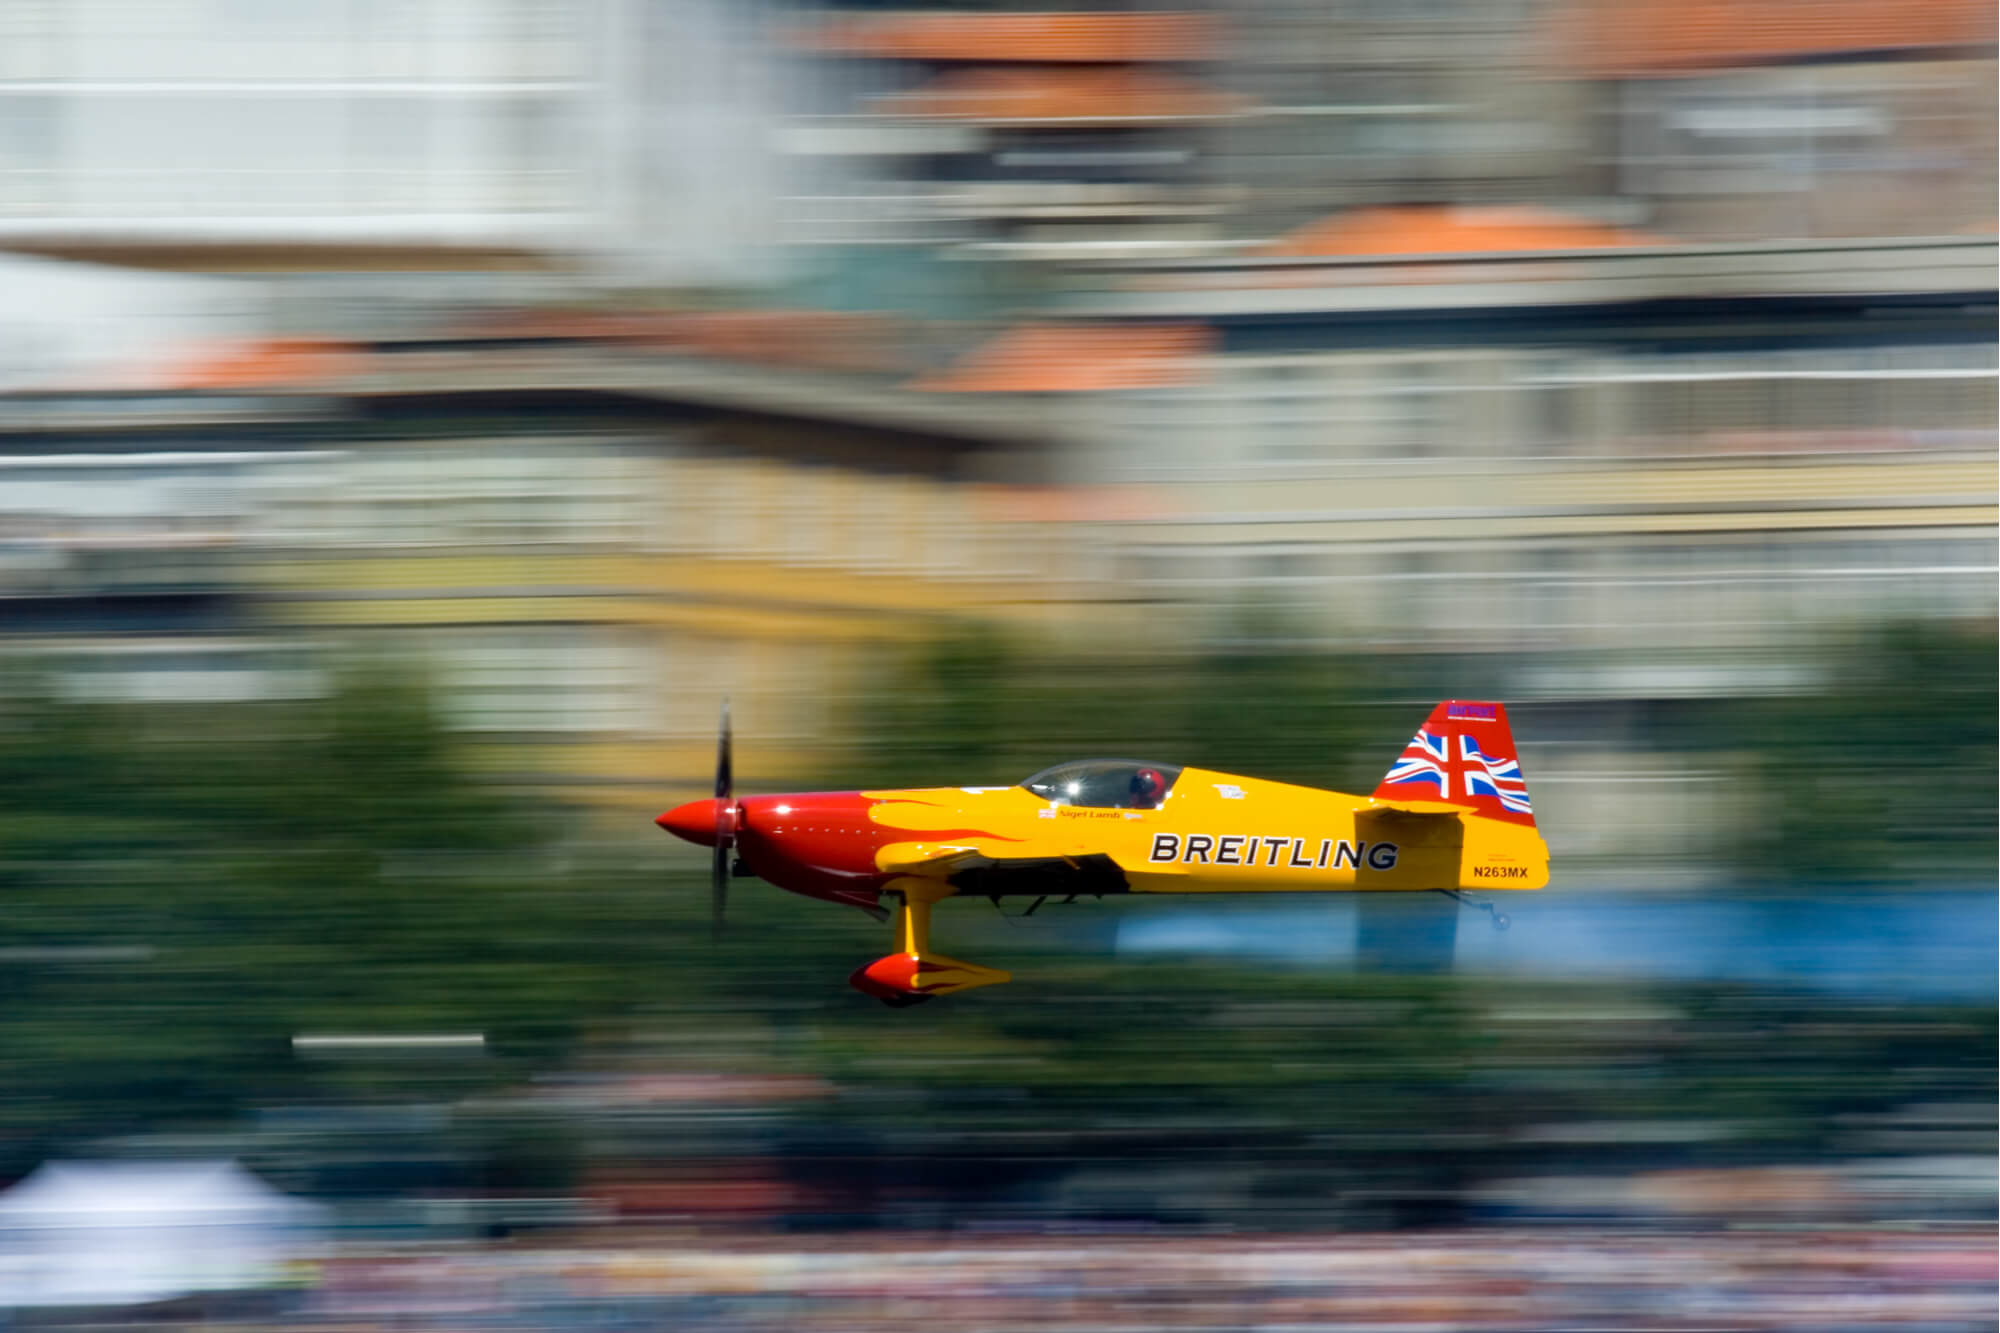 Jetpack racing could join this year's Air Race World Championship